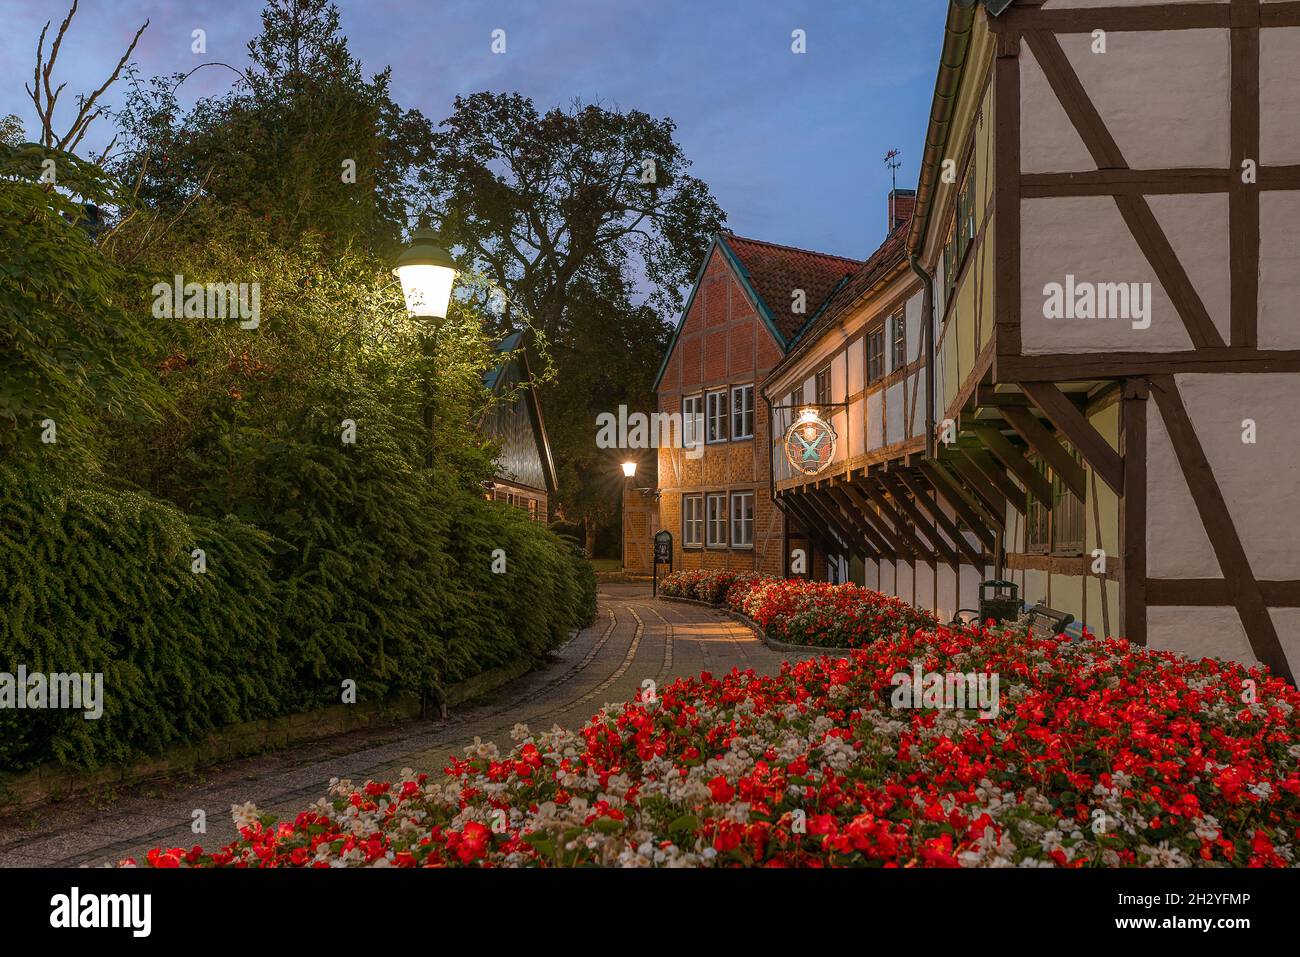 half-timbered houses and a flowerbed of red flowers at Ystads frivillige bergnings corpus, Ystad, Sweden, September 14, 2021 Stock Photo